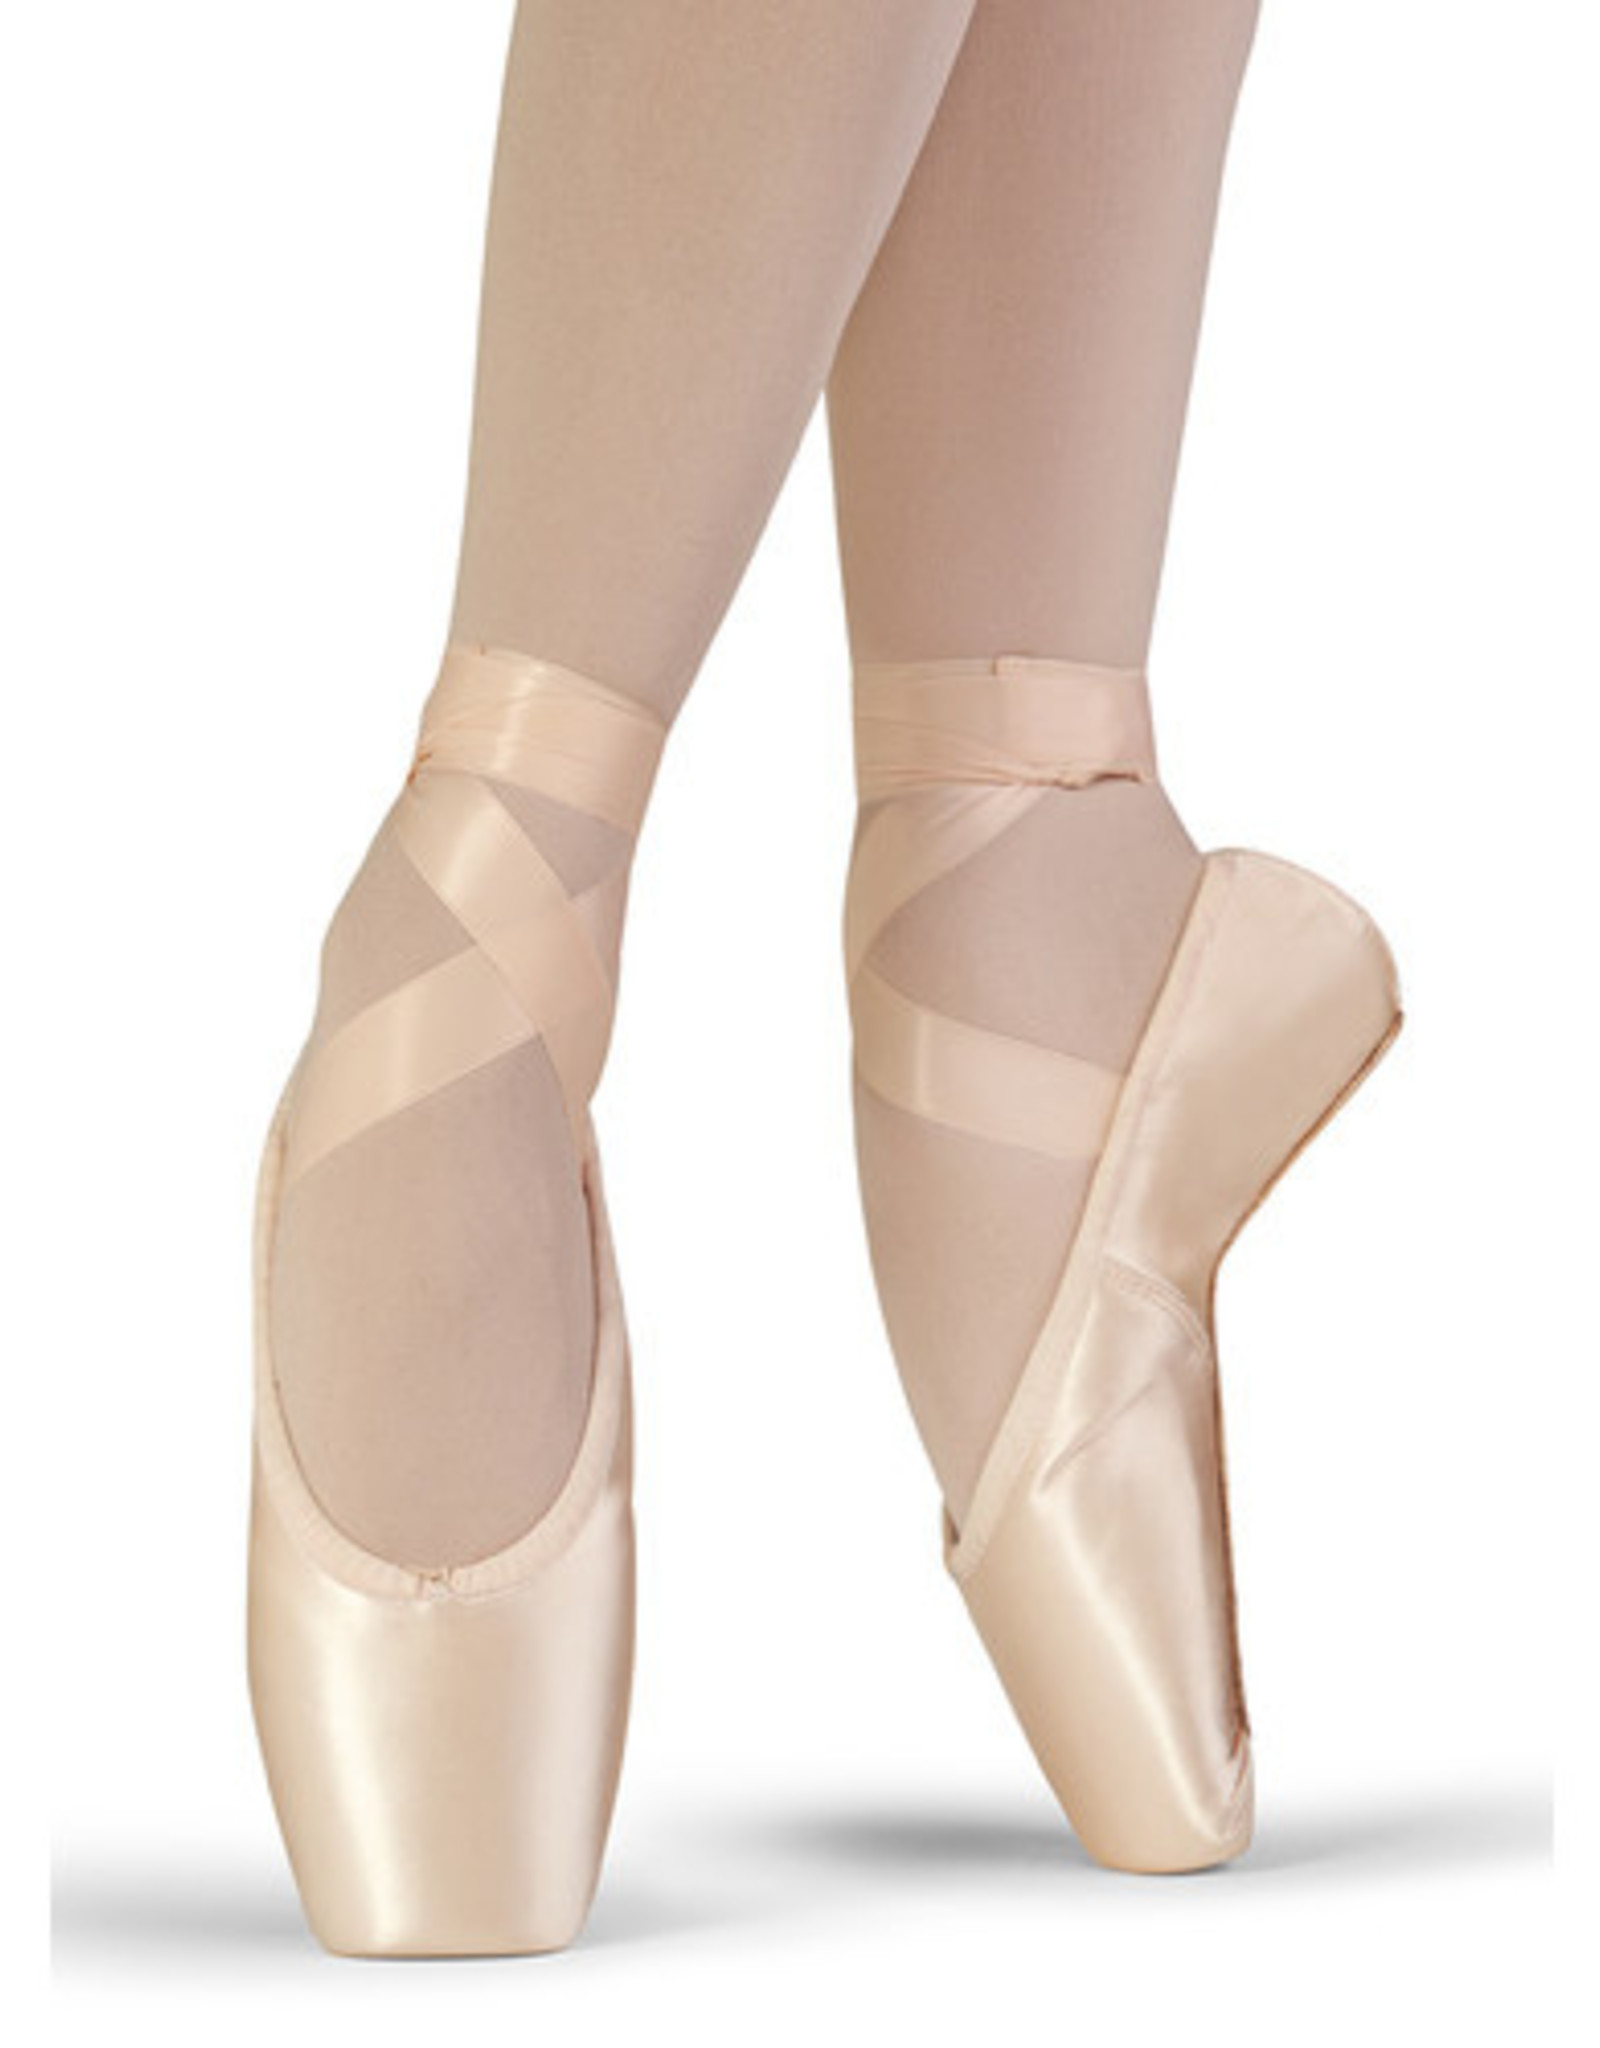 bloch axis pointe shoes